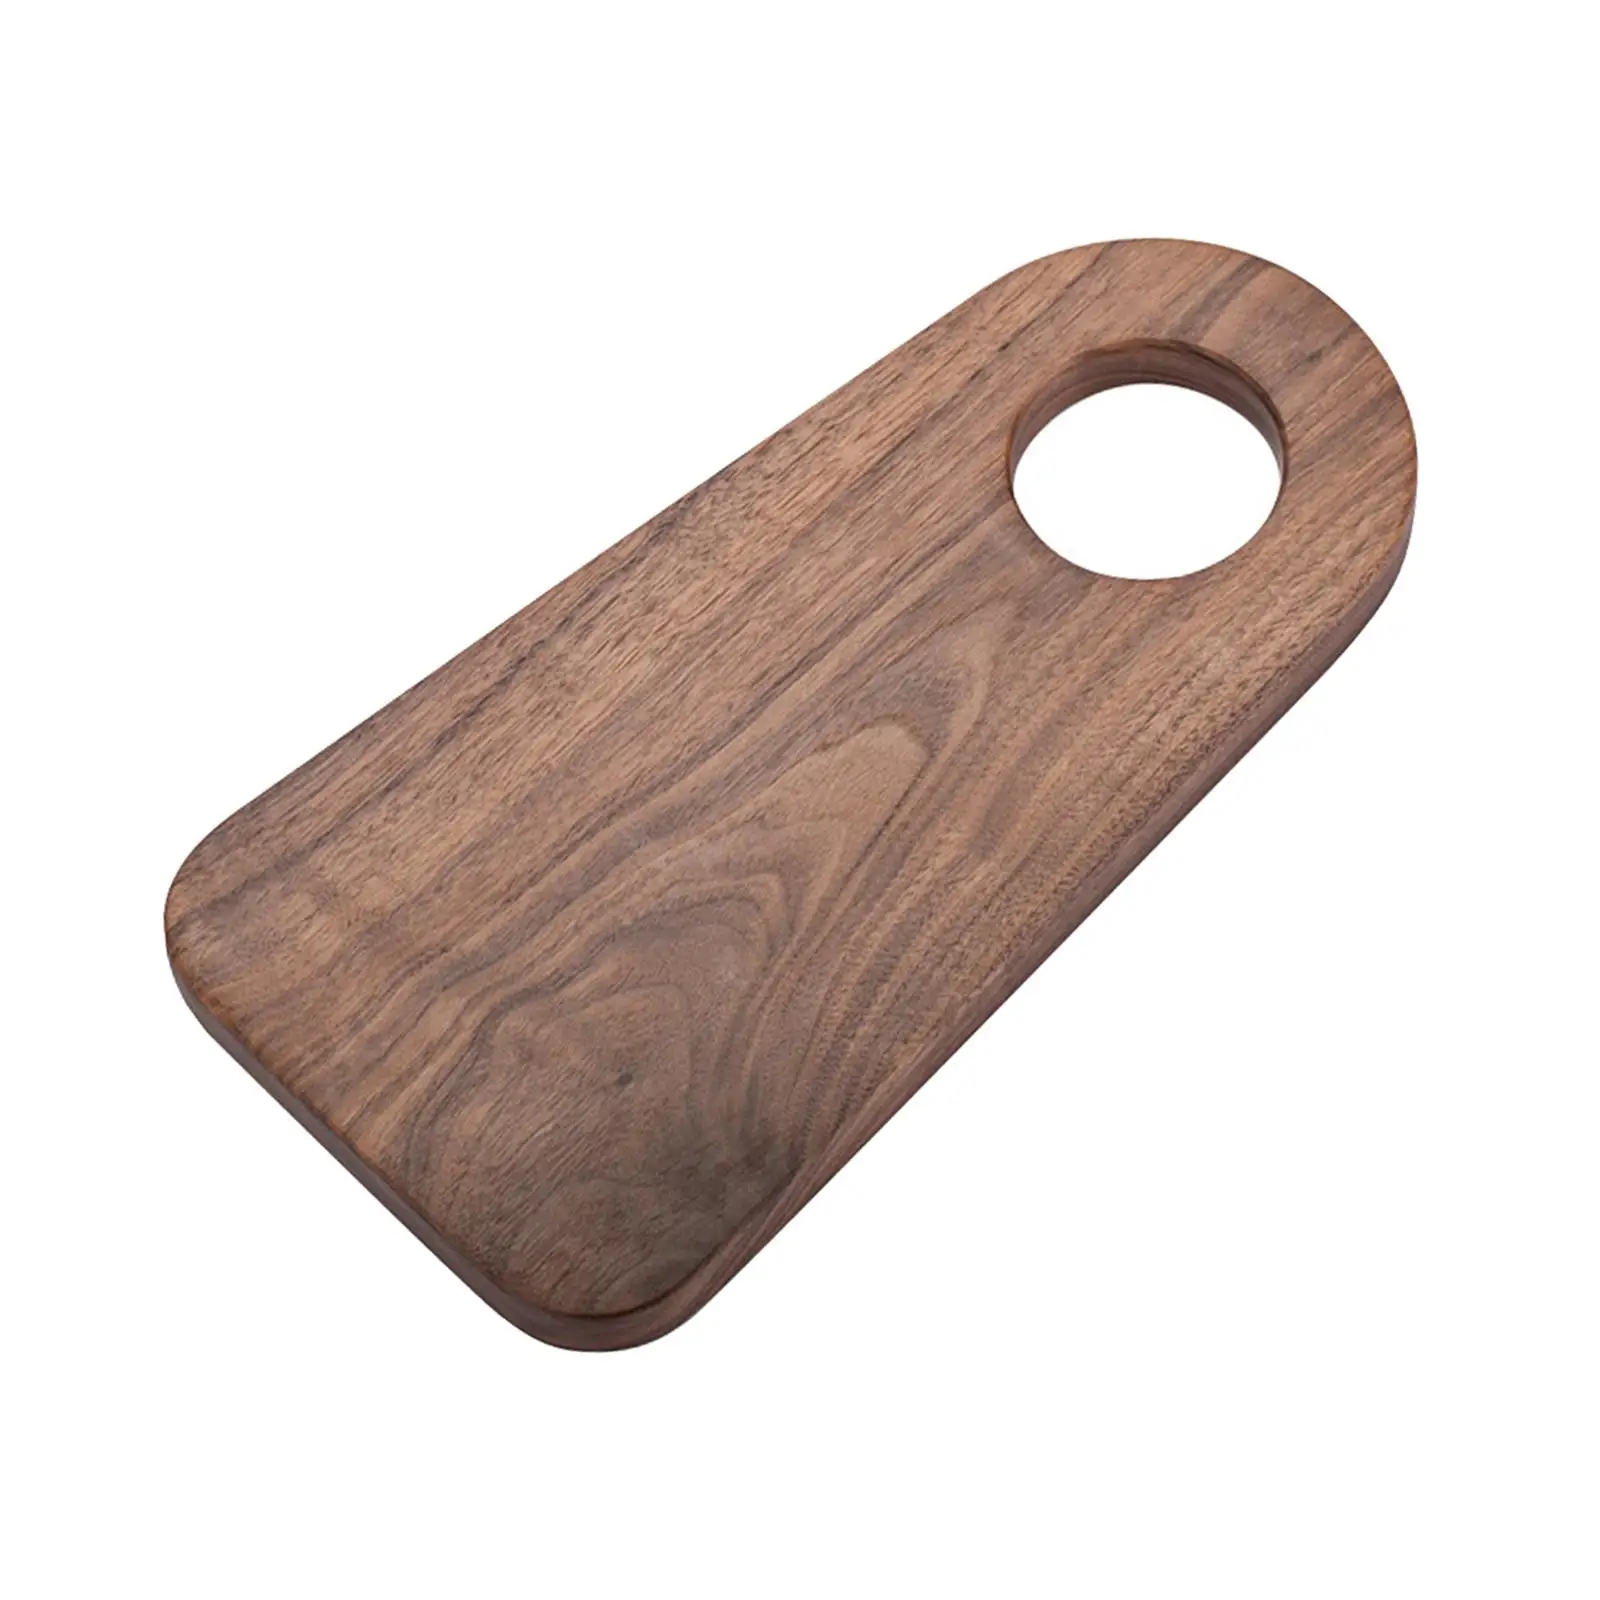 Wood Chopping Board Kitchen Tools Cheese Bread Tray Utensils Serving Board Cutting Board for Fruits Steak Vegetables Bread